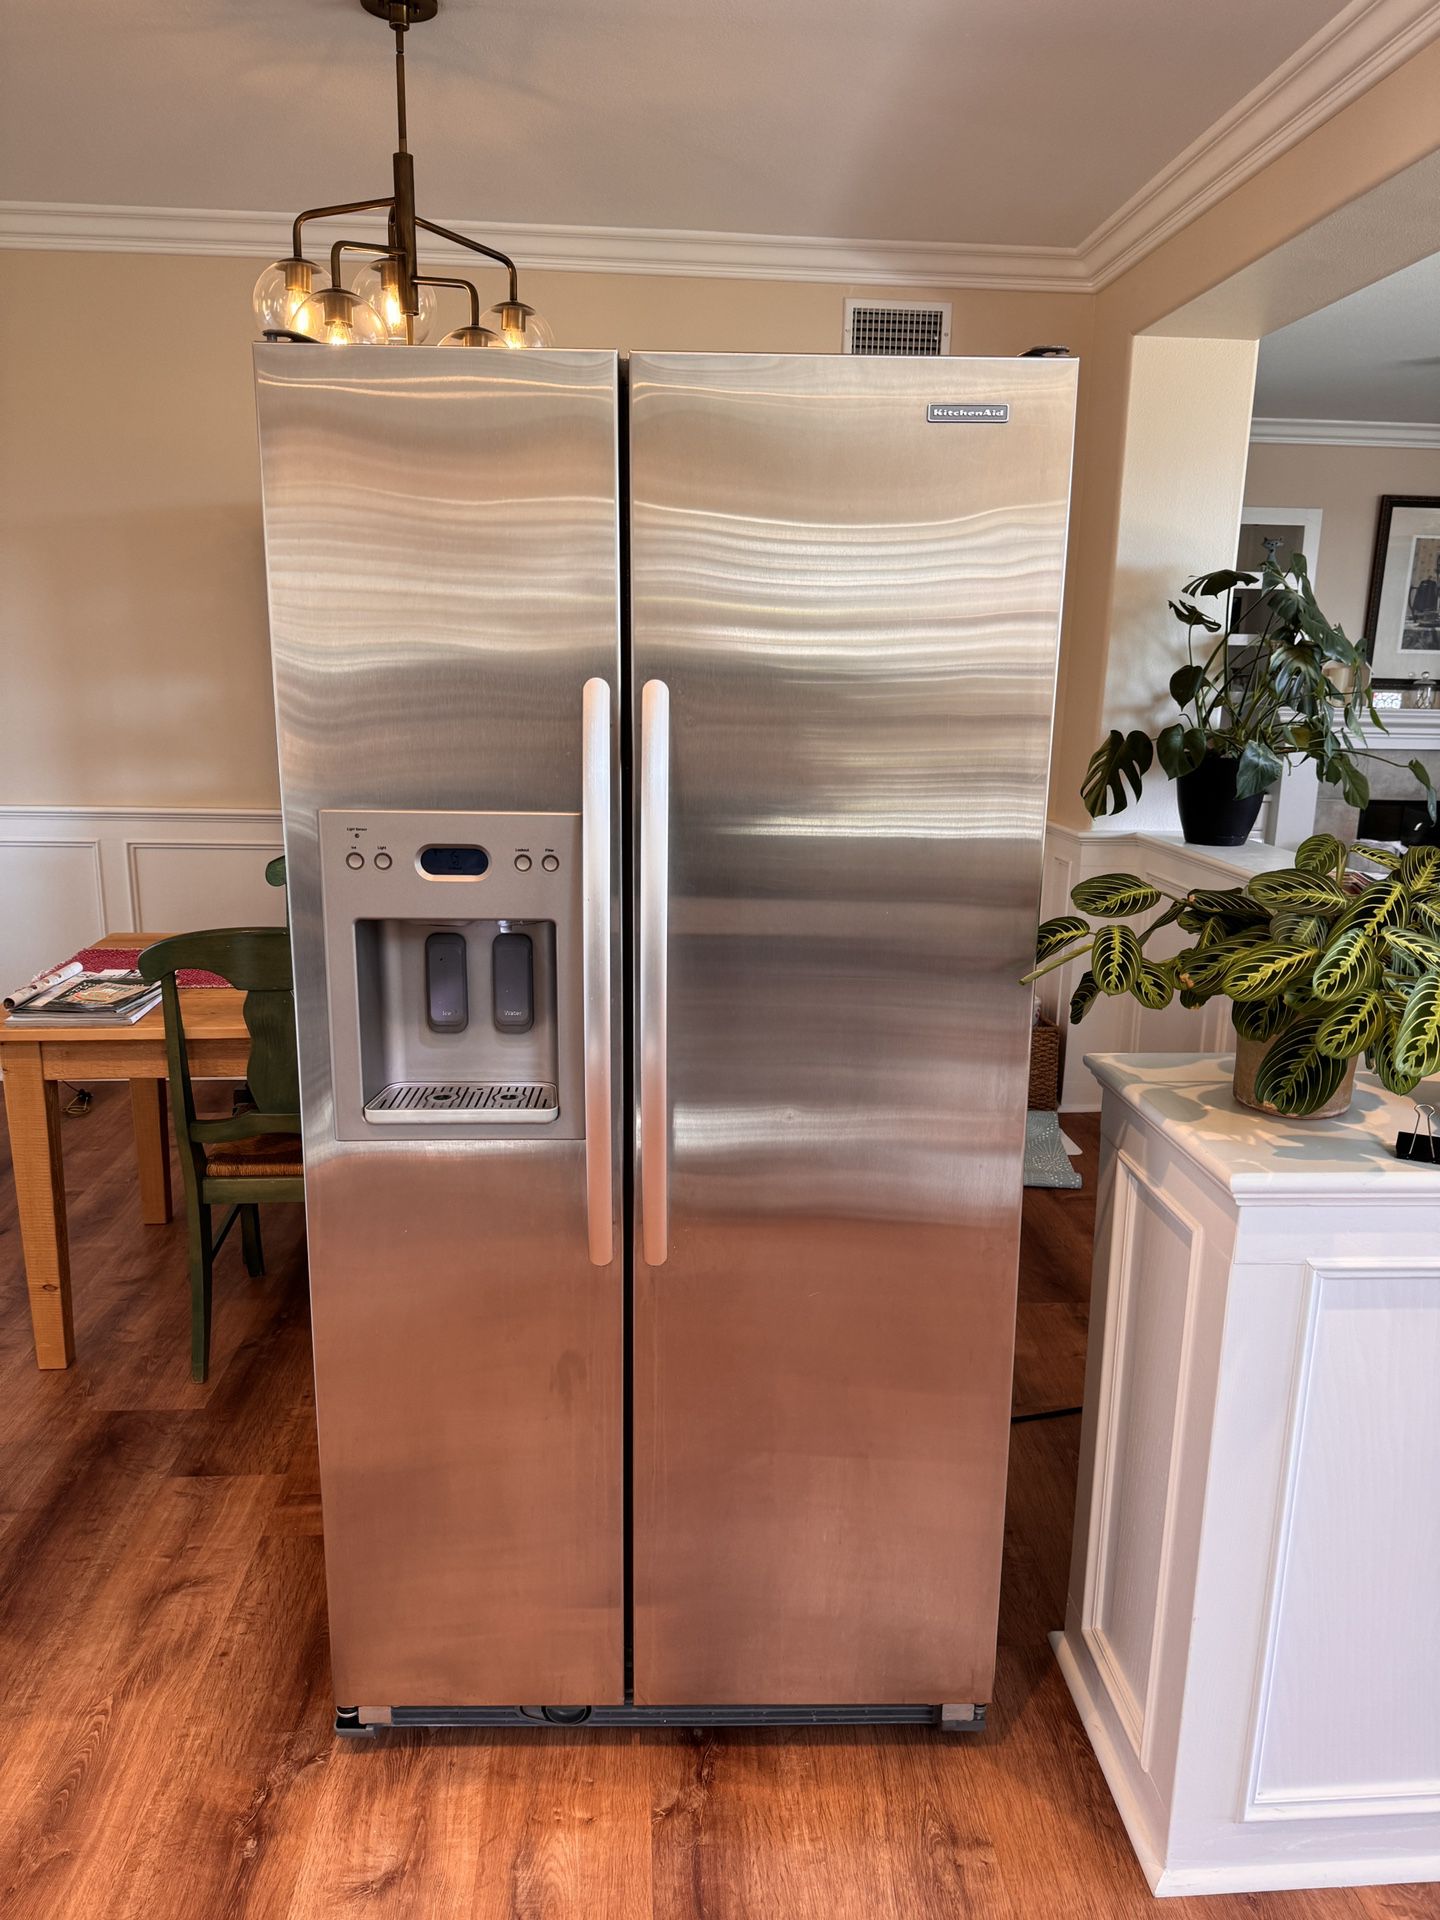 Side-by-side, full-size KitchenAid refrigerator and freezer